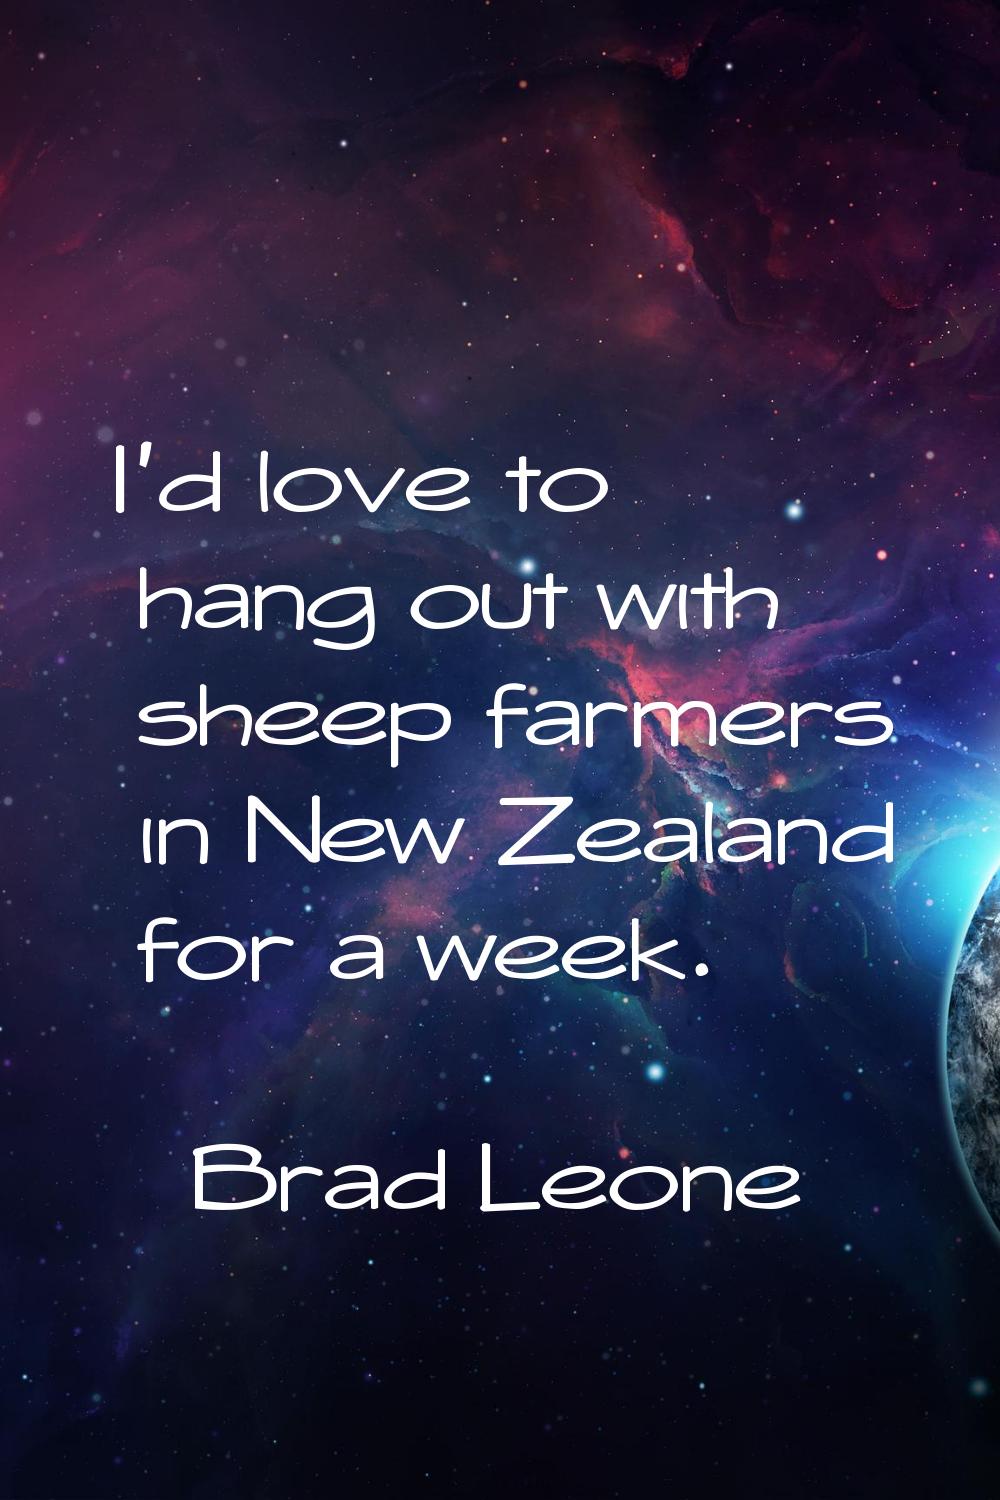 I'd love to hang out with sheep farmers in New Zealand for a week.